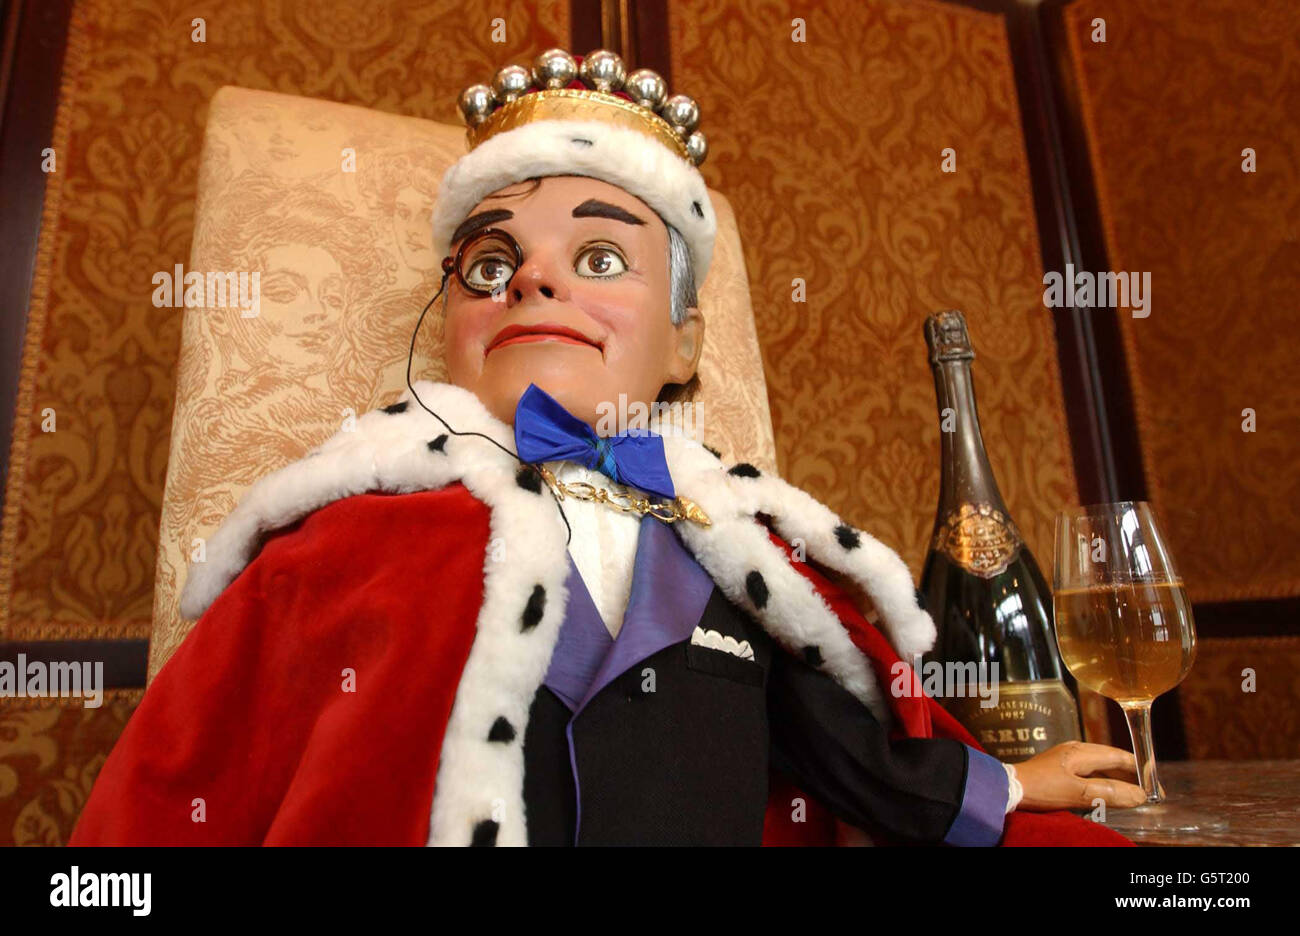 The Original Lord Charles ventriloquial doll made by Len Insull for Ray Alan (estimated price 5,500- 6,500) at a preview for the Bonhams Entertainment Auction that will take place on 17 April 2002 at Bonhams in Chelsea, London. Stock Photo